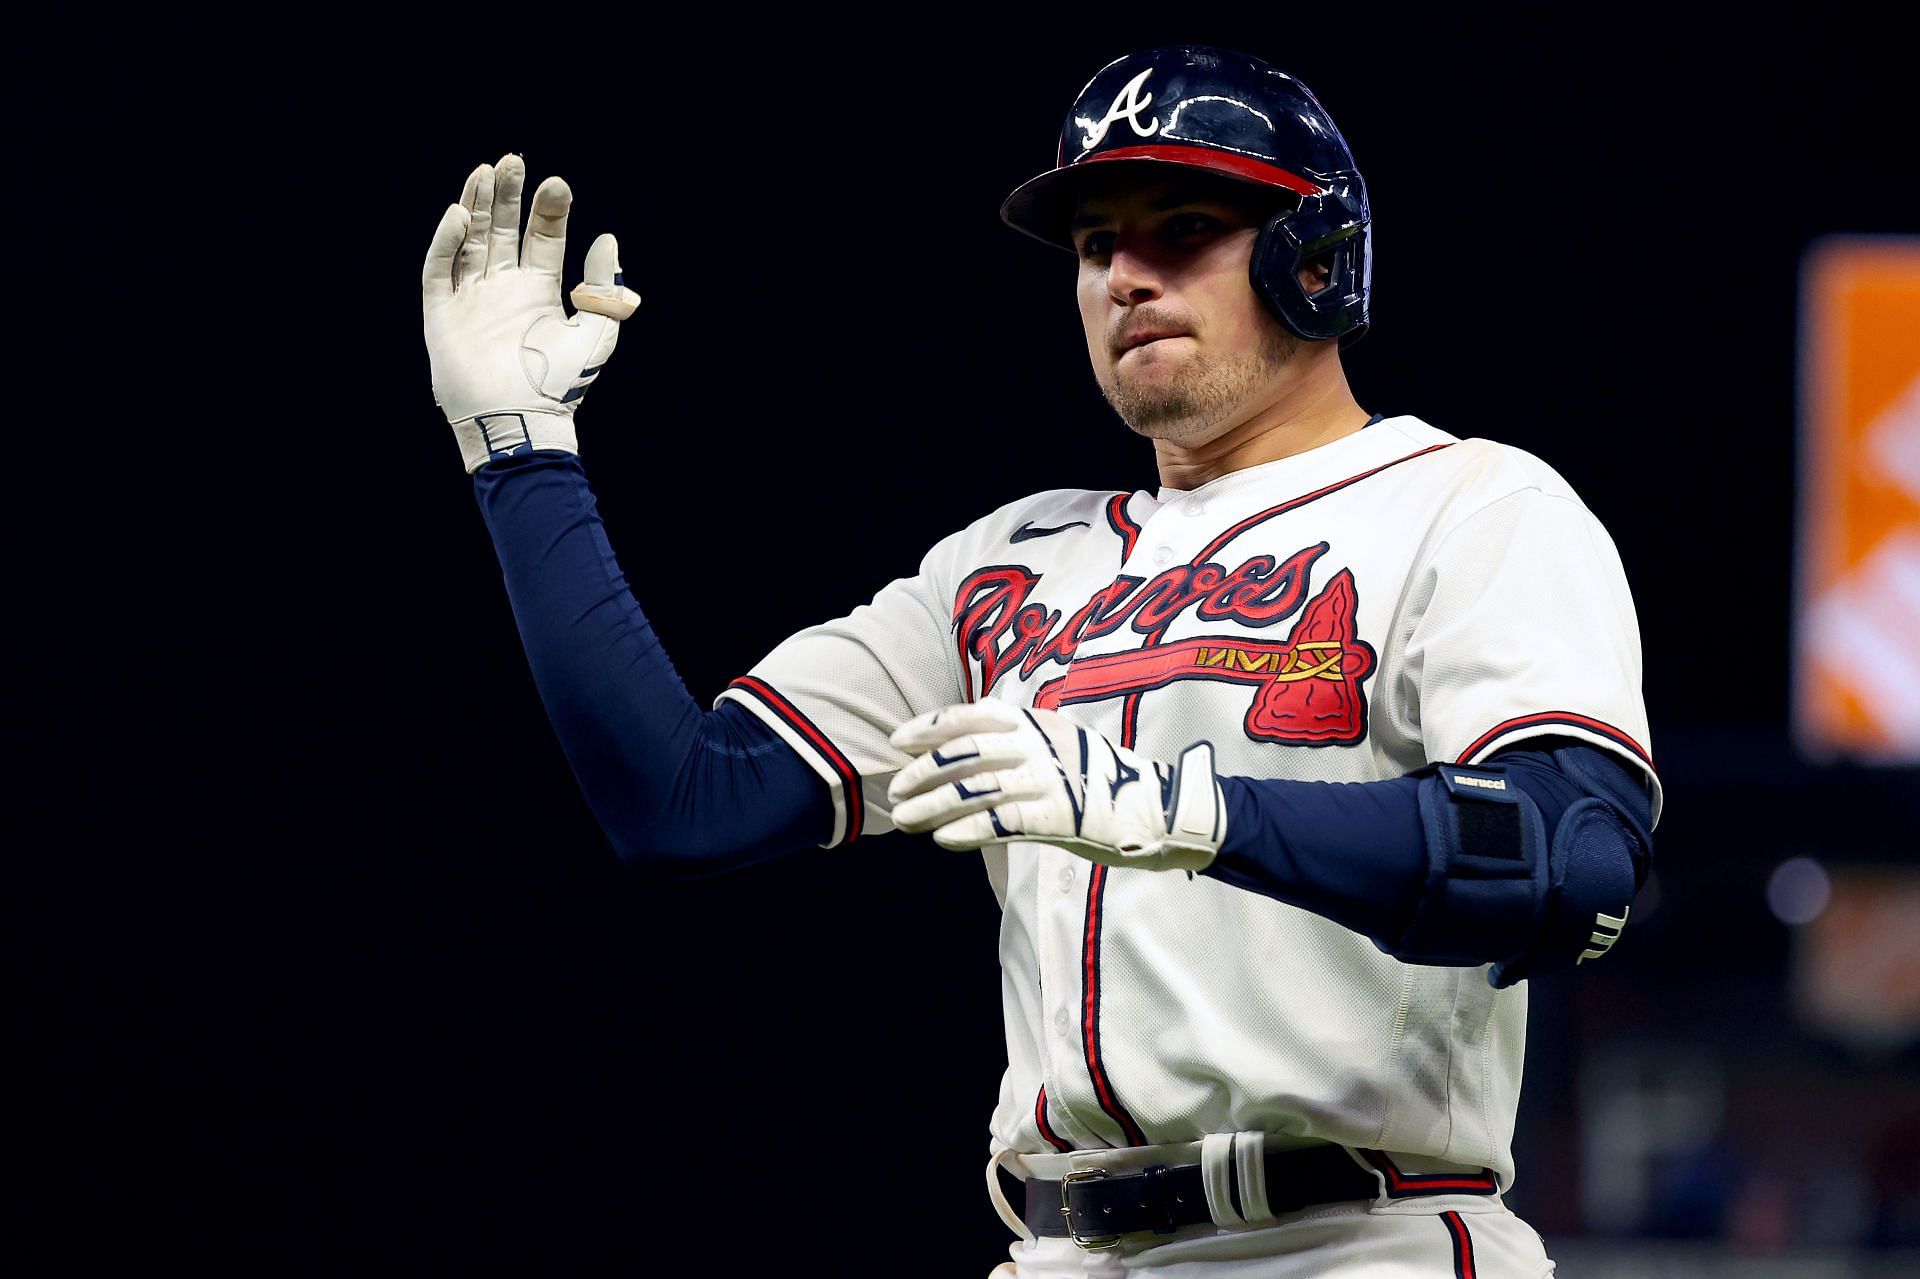 Braves' Austin Riley reflects on game-winning double play and